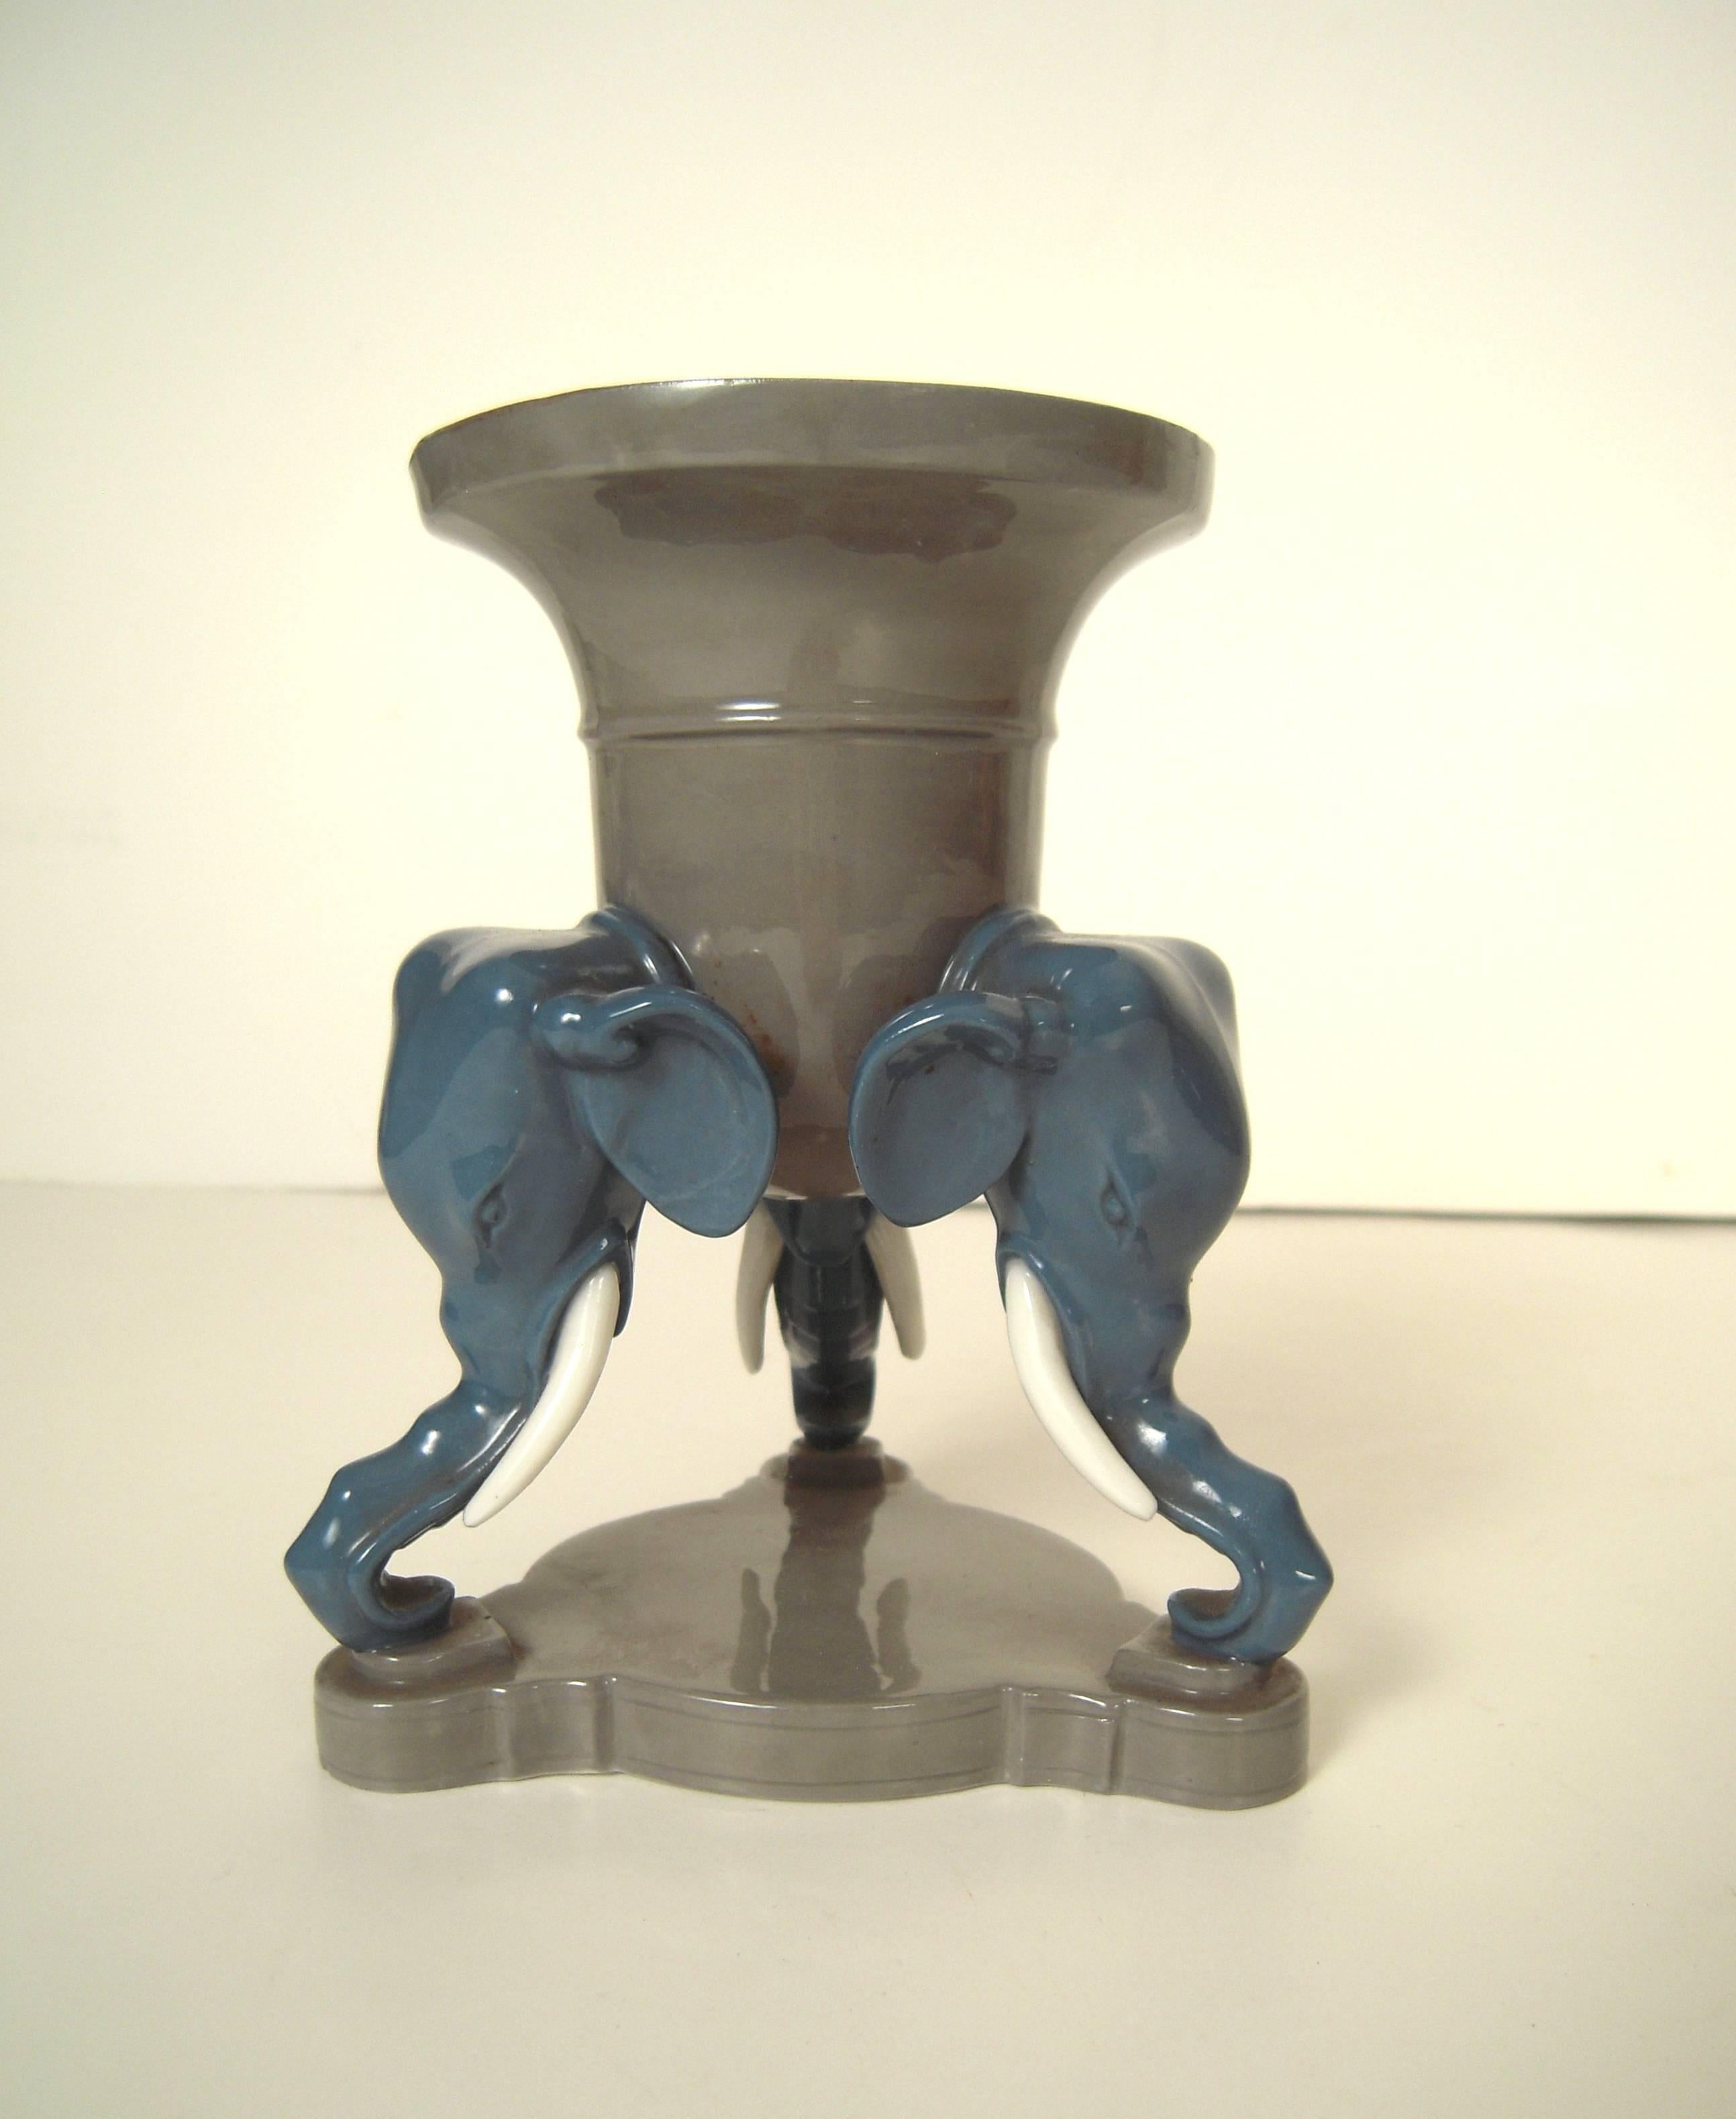 A well modeled ceramic vase, English, circa 1875, in the form of an inverted bell shaped vessel, glazed in sage green, supported by three blue elephant heads with white tusks, on a shaped triangular plinth, with impressed 'Mintons' mark on the